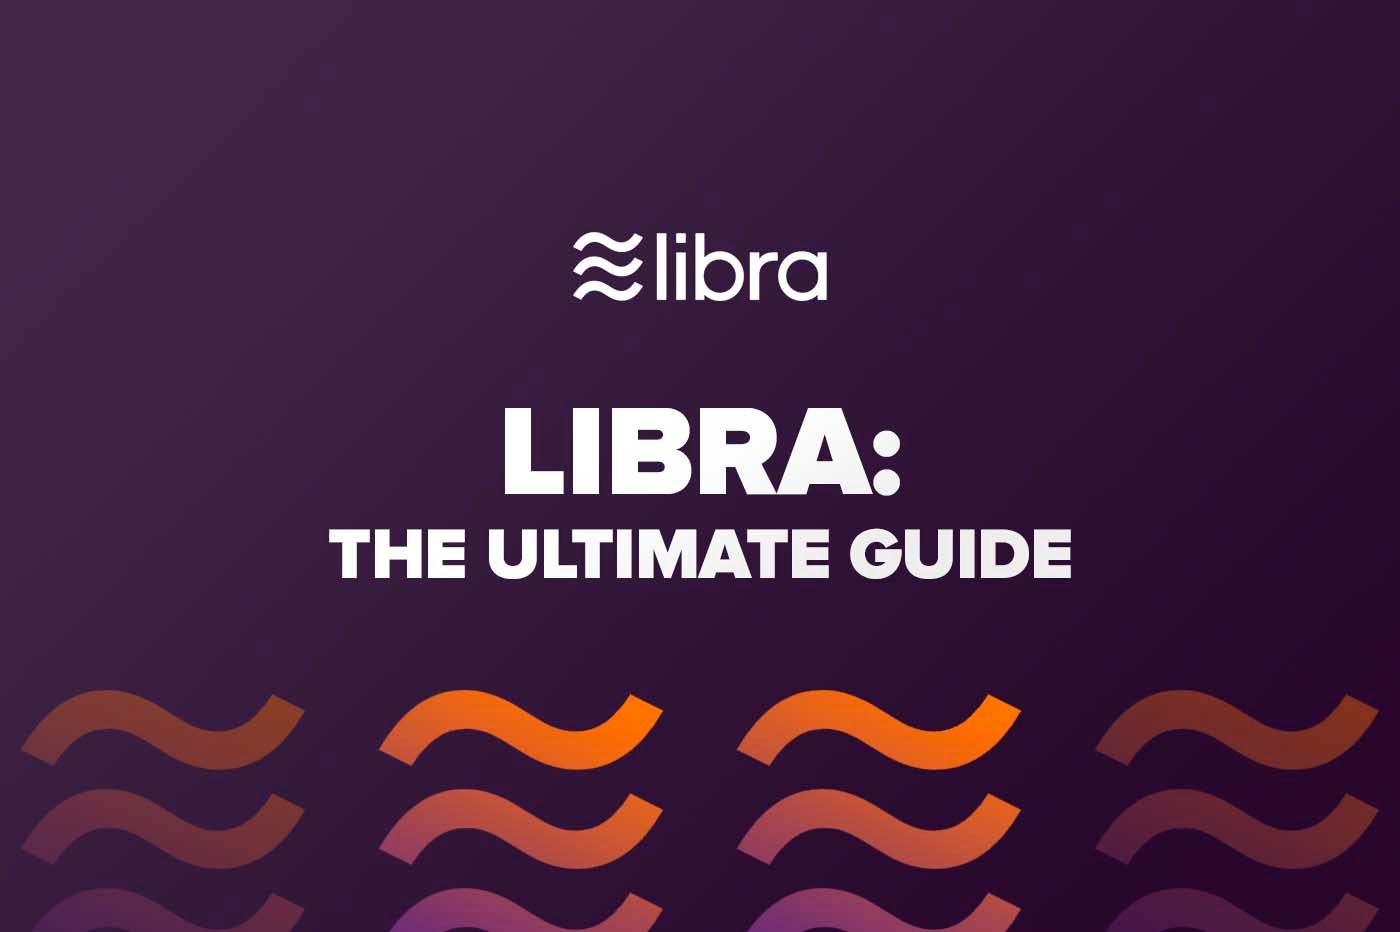 Libra Coin: the Ultimate Guide to Libra Cryptocurrency